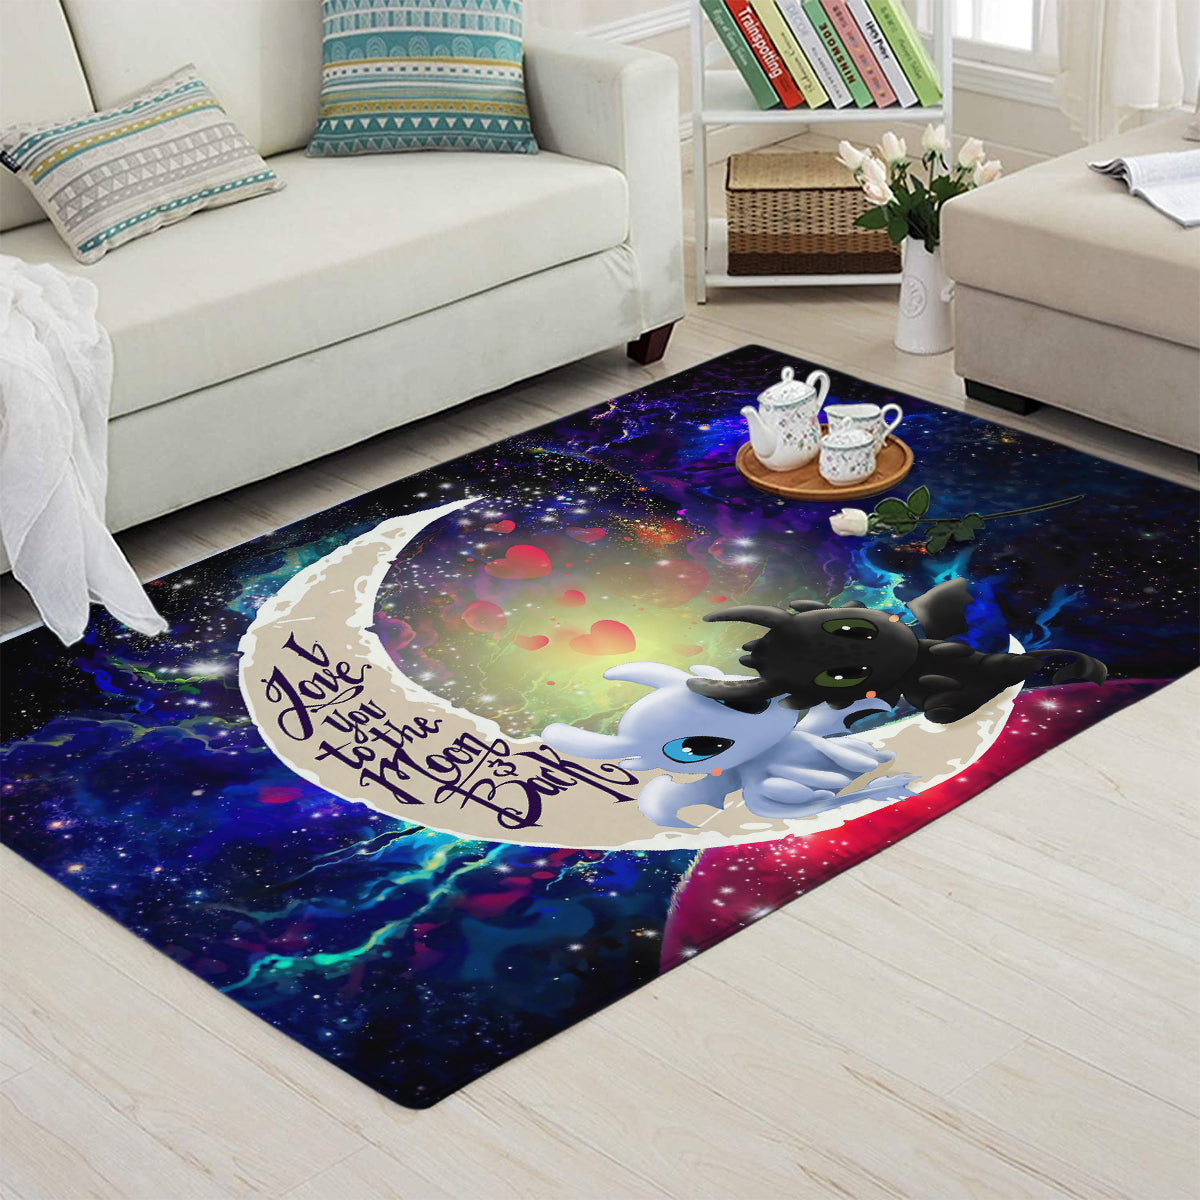 Toothless Light Fury Night Fury Love You To The Moon Galaxy Carpet Rug Home Room Decor